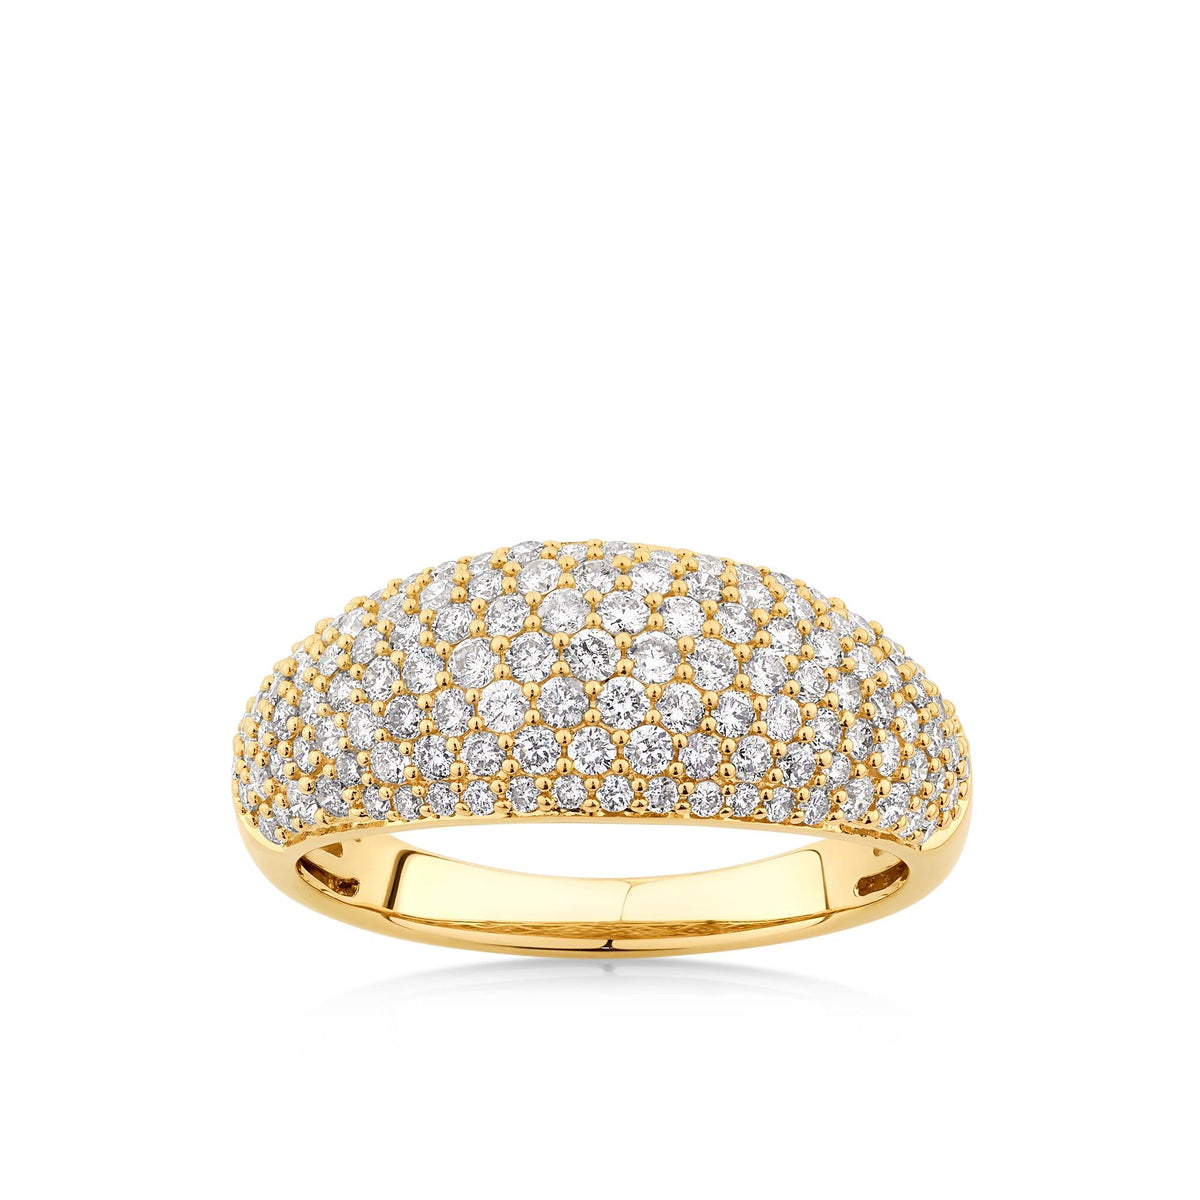 1.00ct TW Diamond Pavé Dome Ring in 9ct Yellow Gold - Wallace Bishop